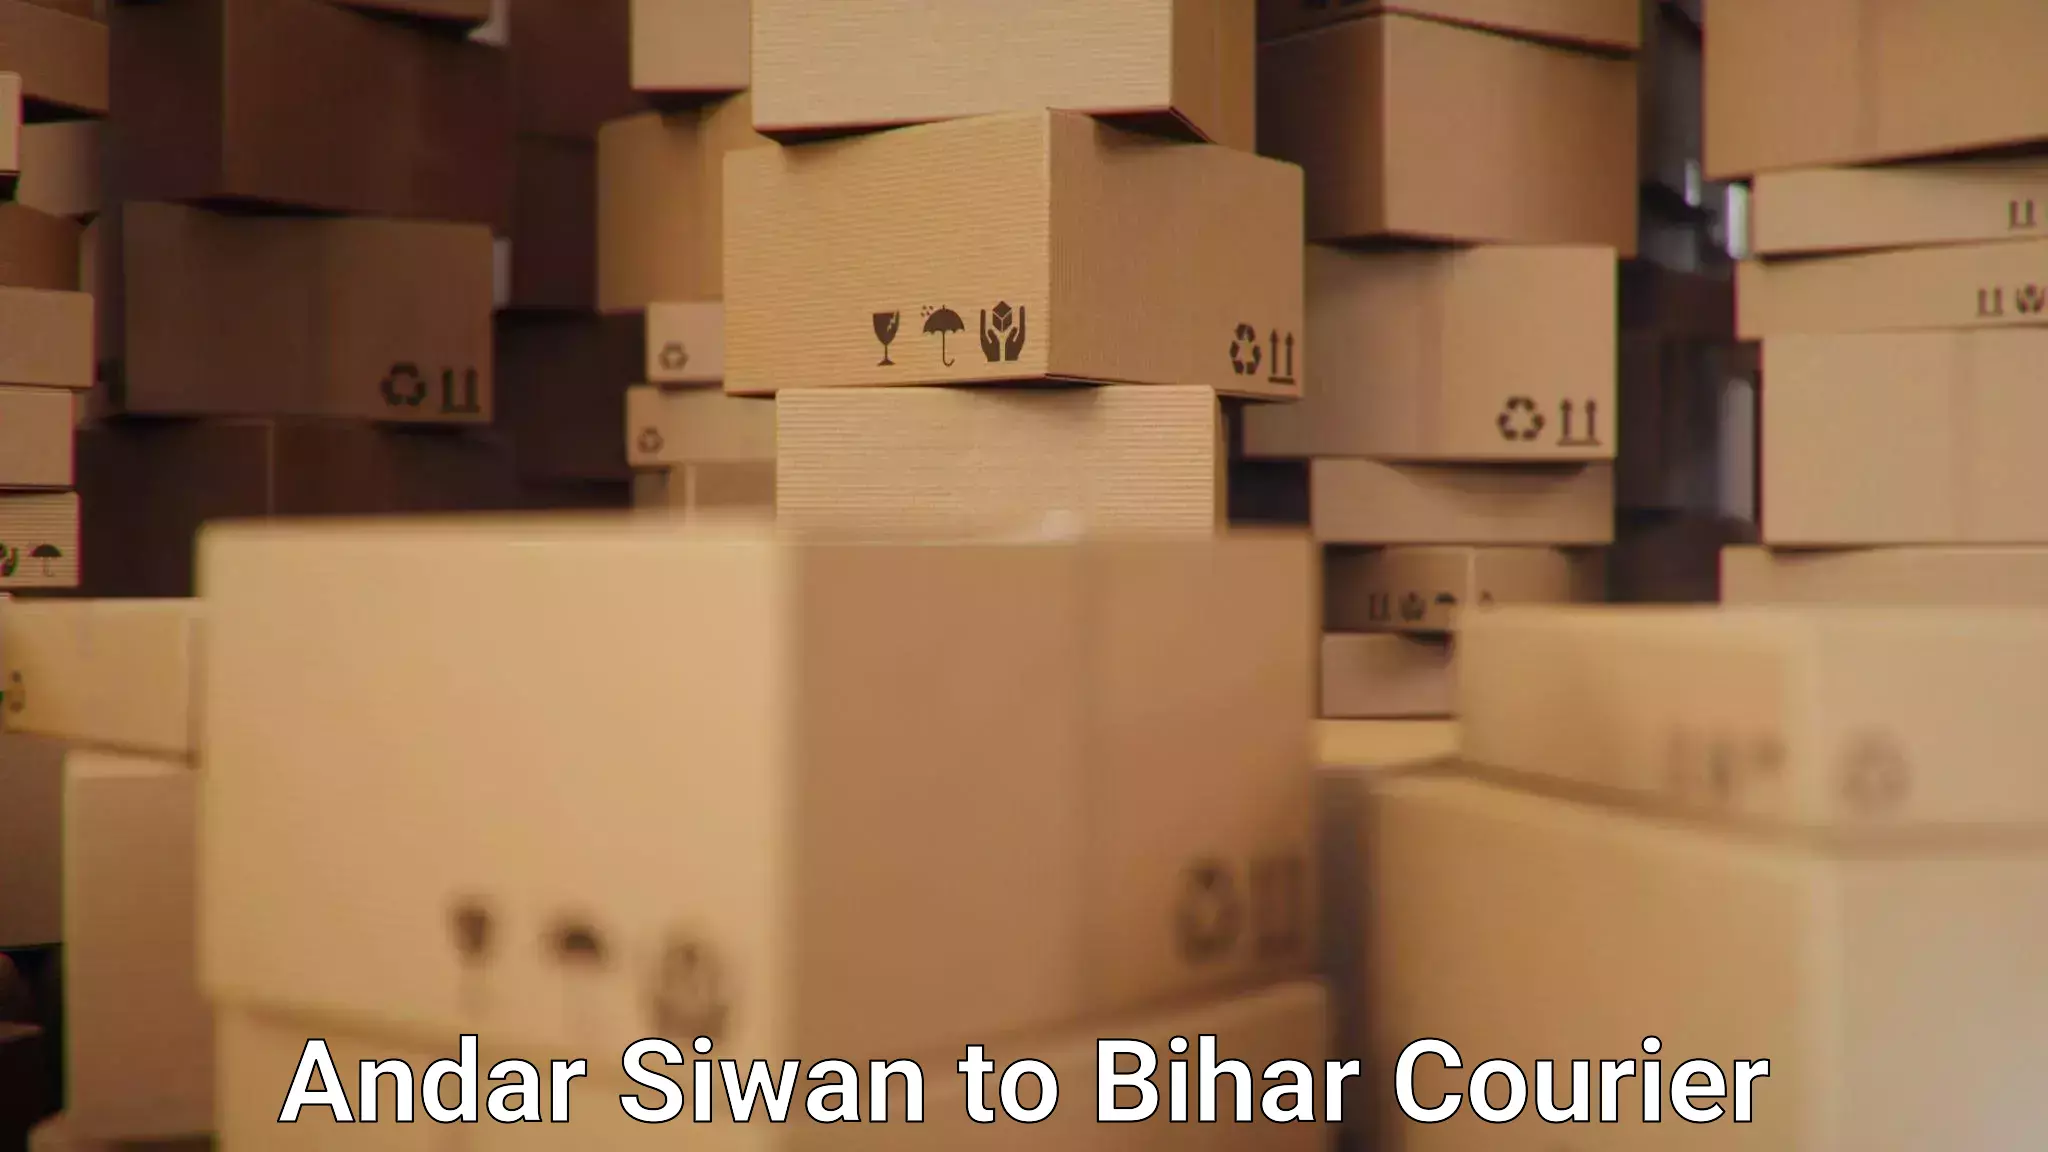 Holiday shipping services Andar Siwan to Piro